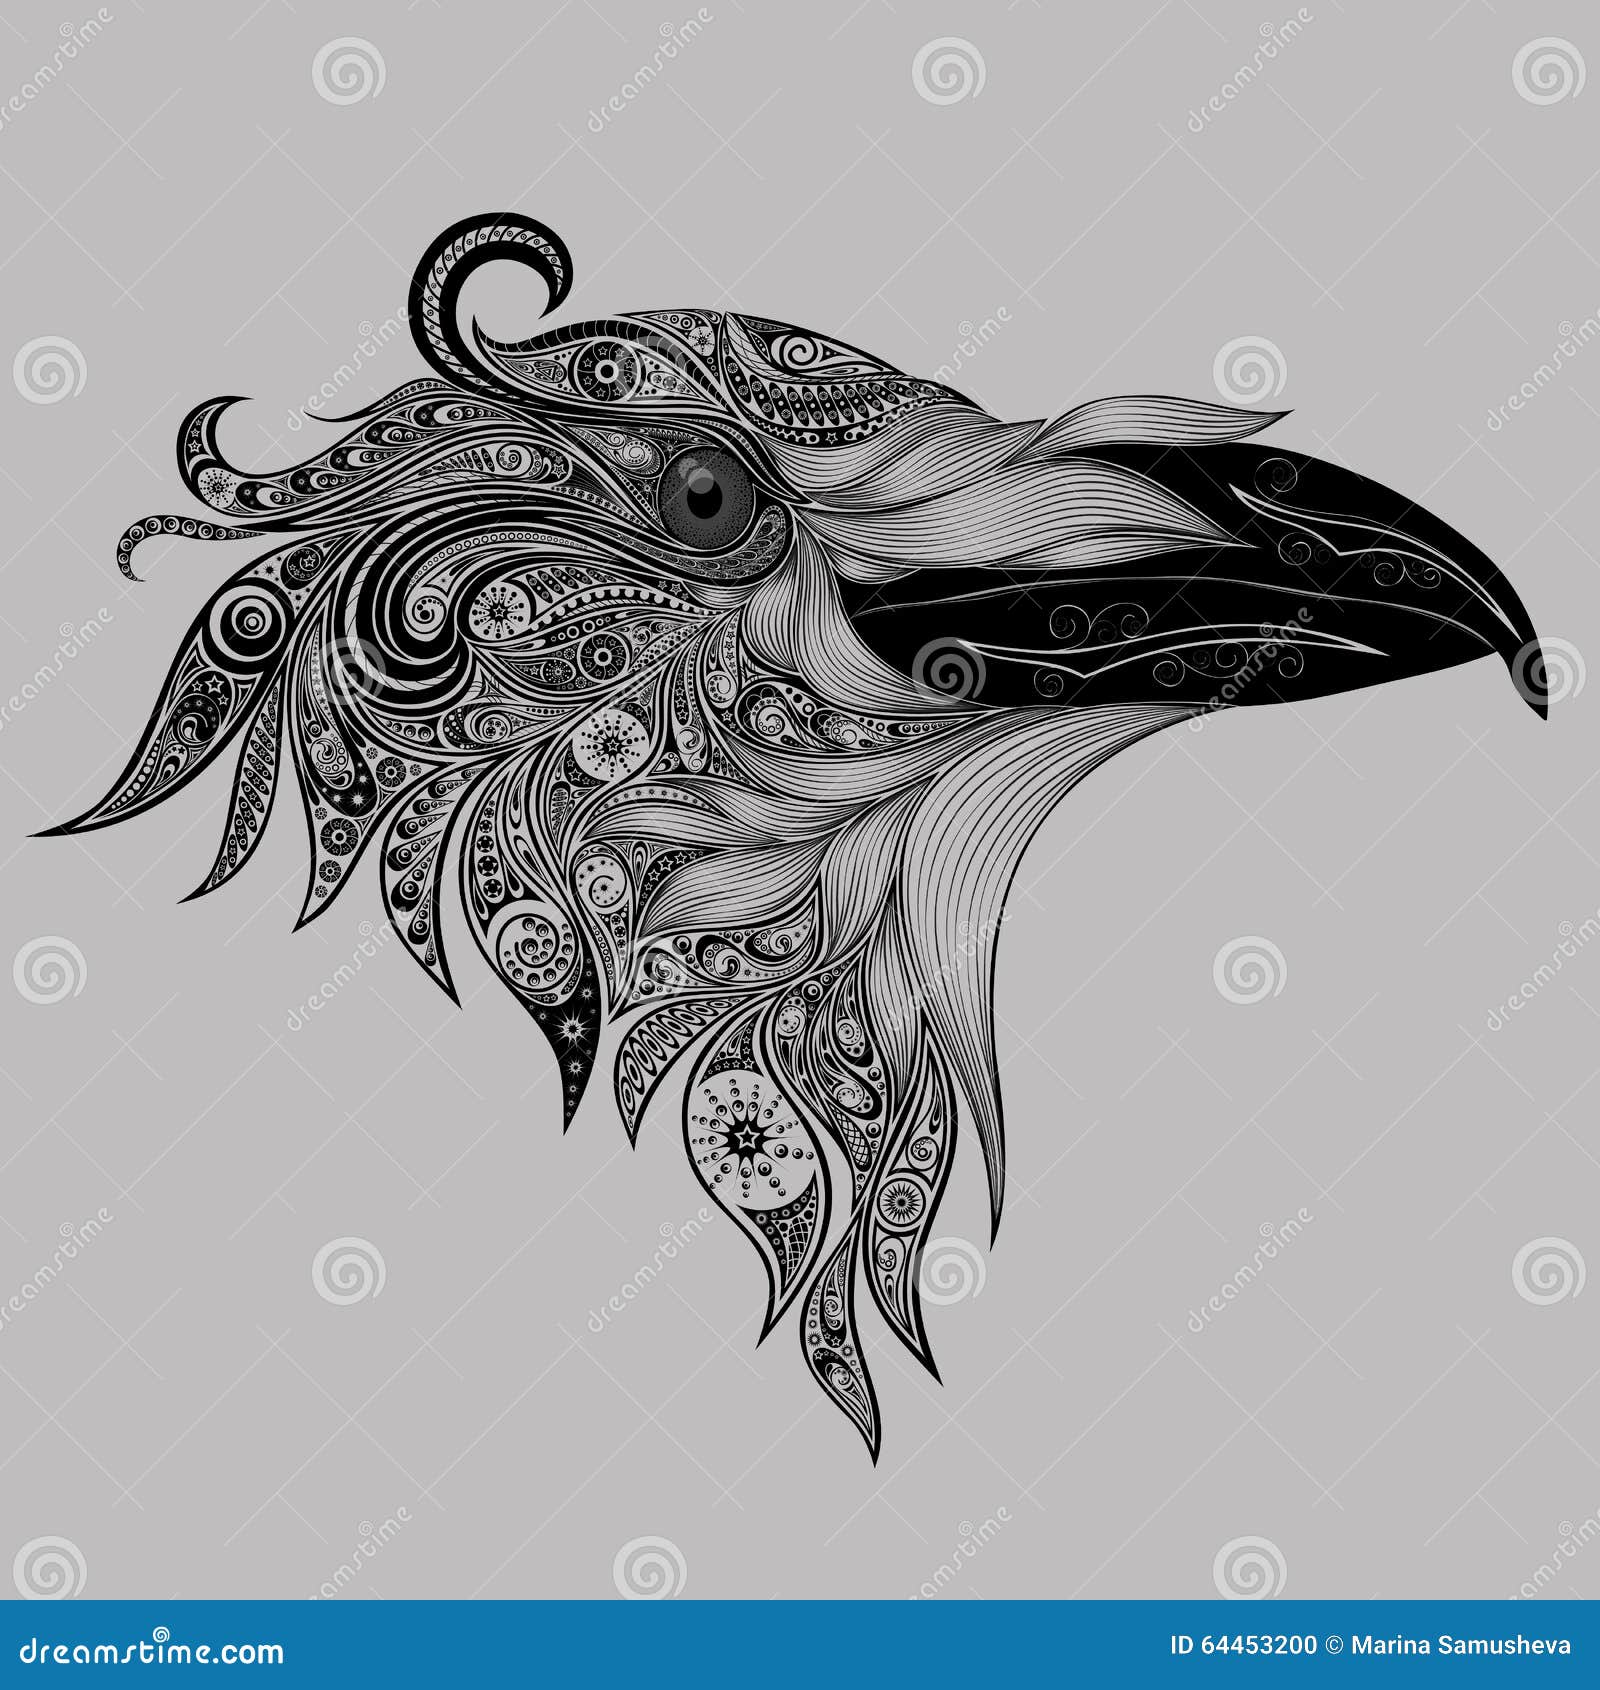 Abstract vector crow stock illustration. Illustration of black - 64453200